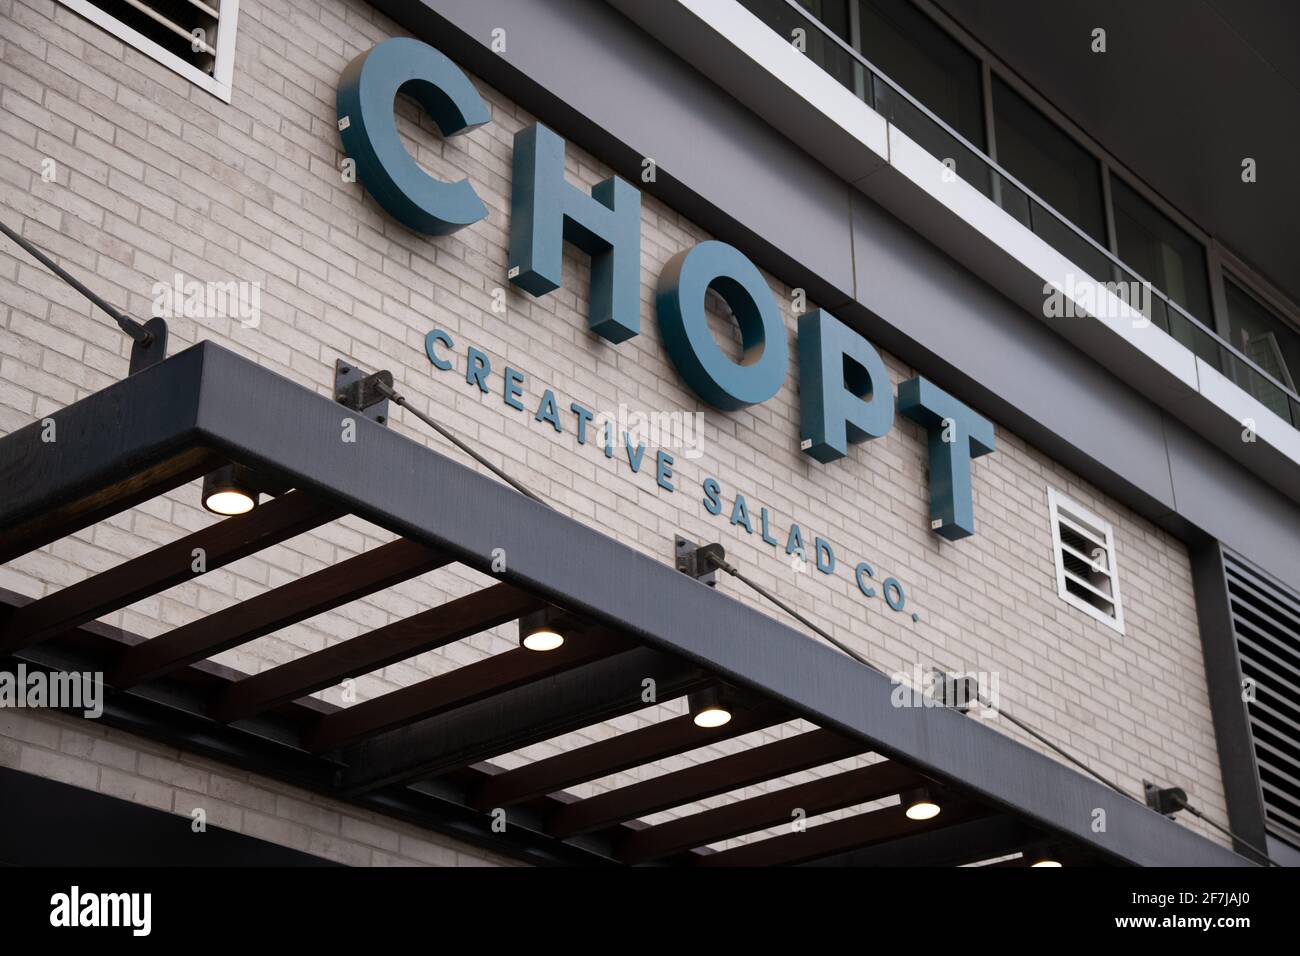 Washington, USA. 07th Apr, 2021. A general view of a Chopt location in Washington, DC, on Wednesday, April 7, 2021, amid the coronavirus pandemic. Confirmed COVID-19 deaths in America hit 560 thousand this week, and even though vaccination rates are climbing, public health experts are also warning of the risk of rising case numbers in many areas of the country. (Graeme Sloan/Sipa USA) Credit: Sipa USA/Alamy Live News Stock Photo